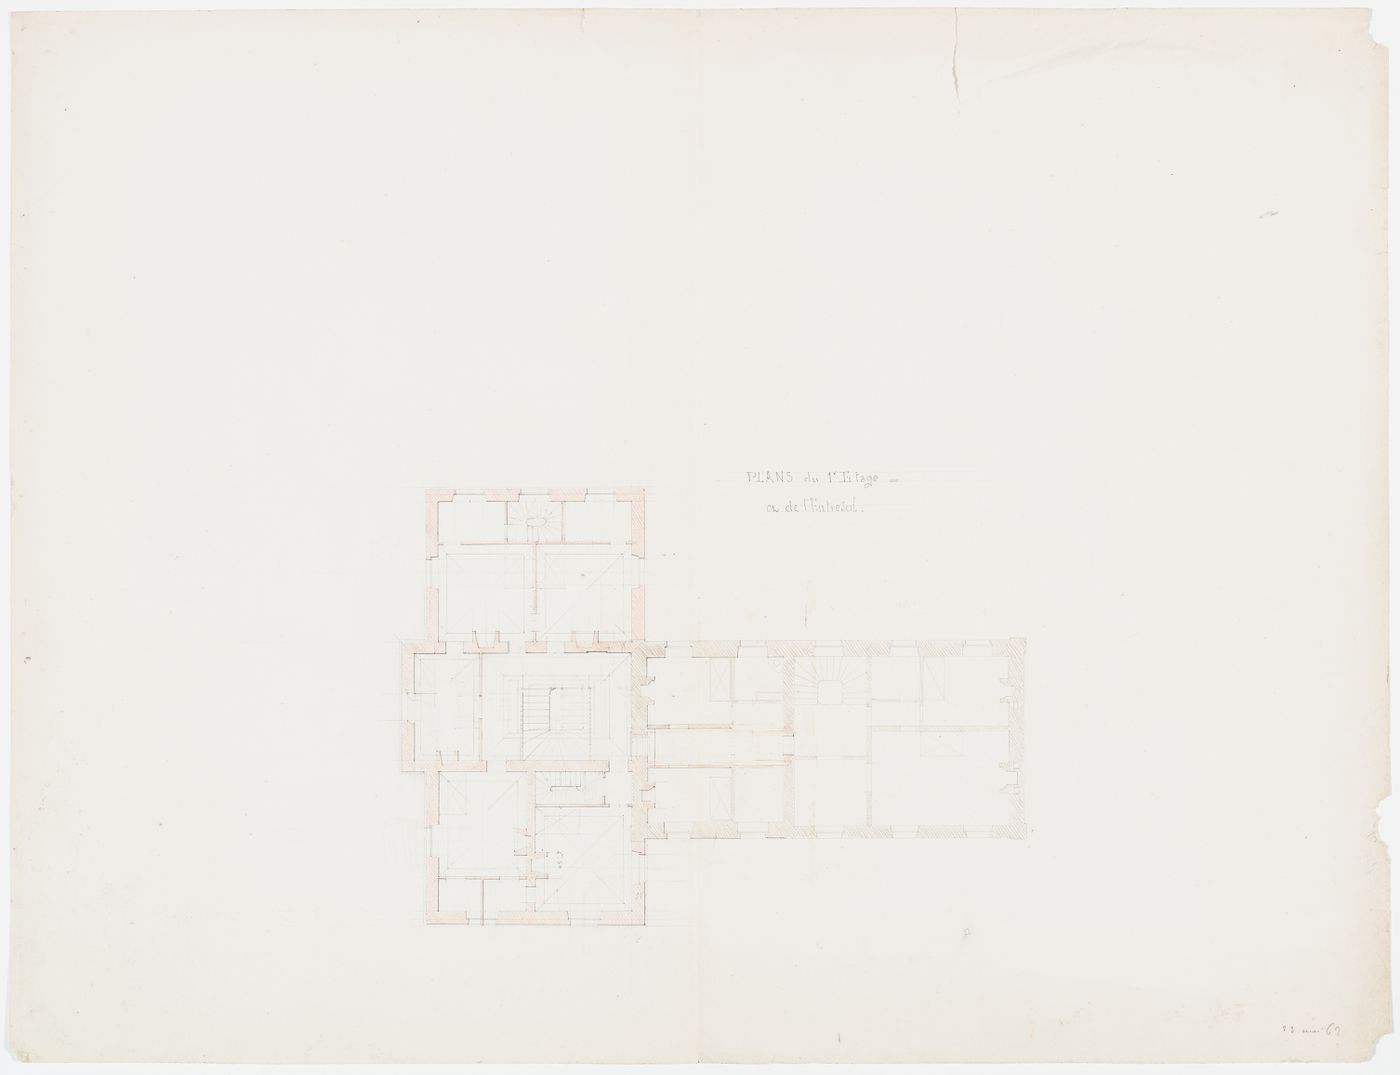 Château de Marcoussis: Plan for the first floor and "entresol"